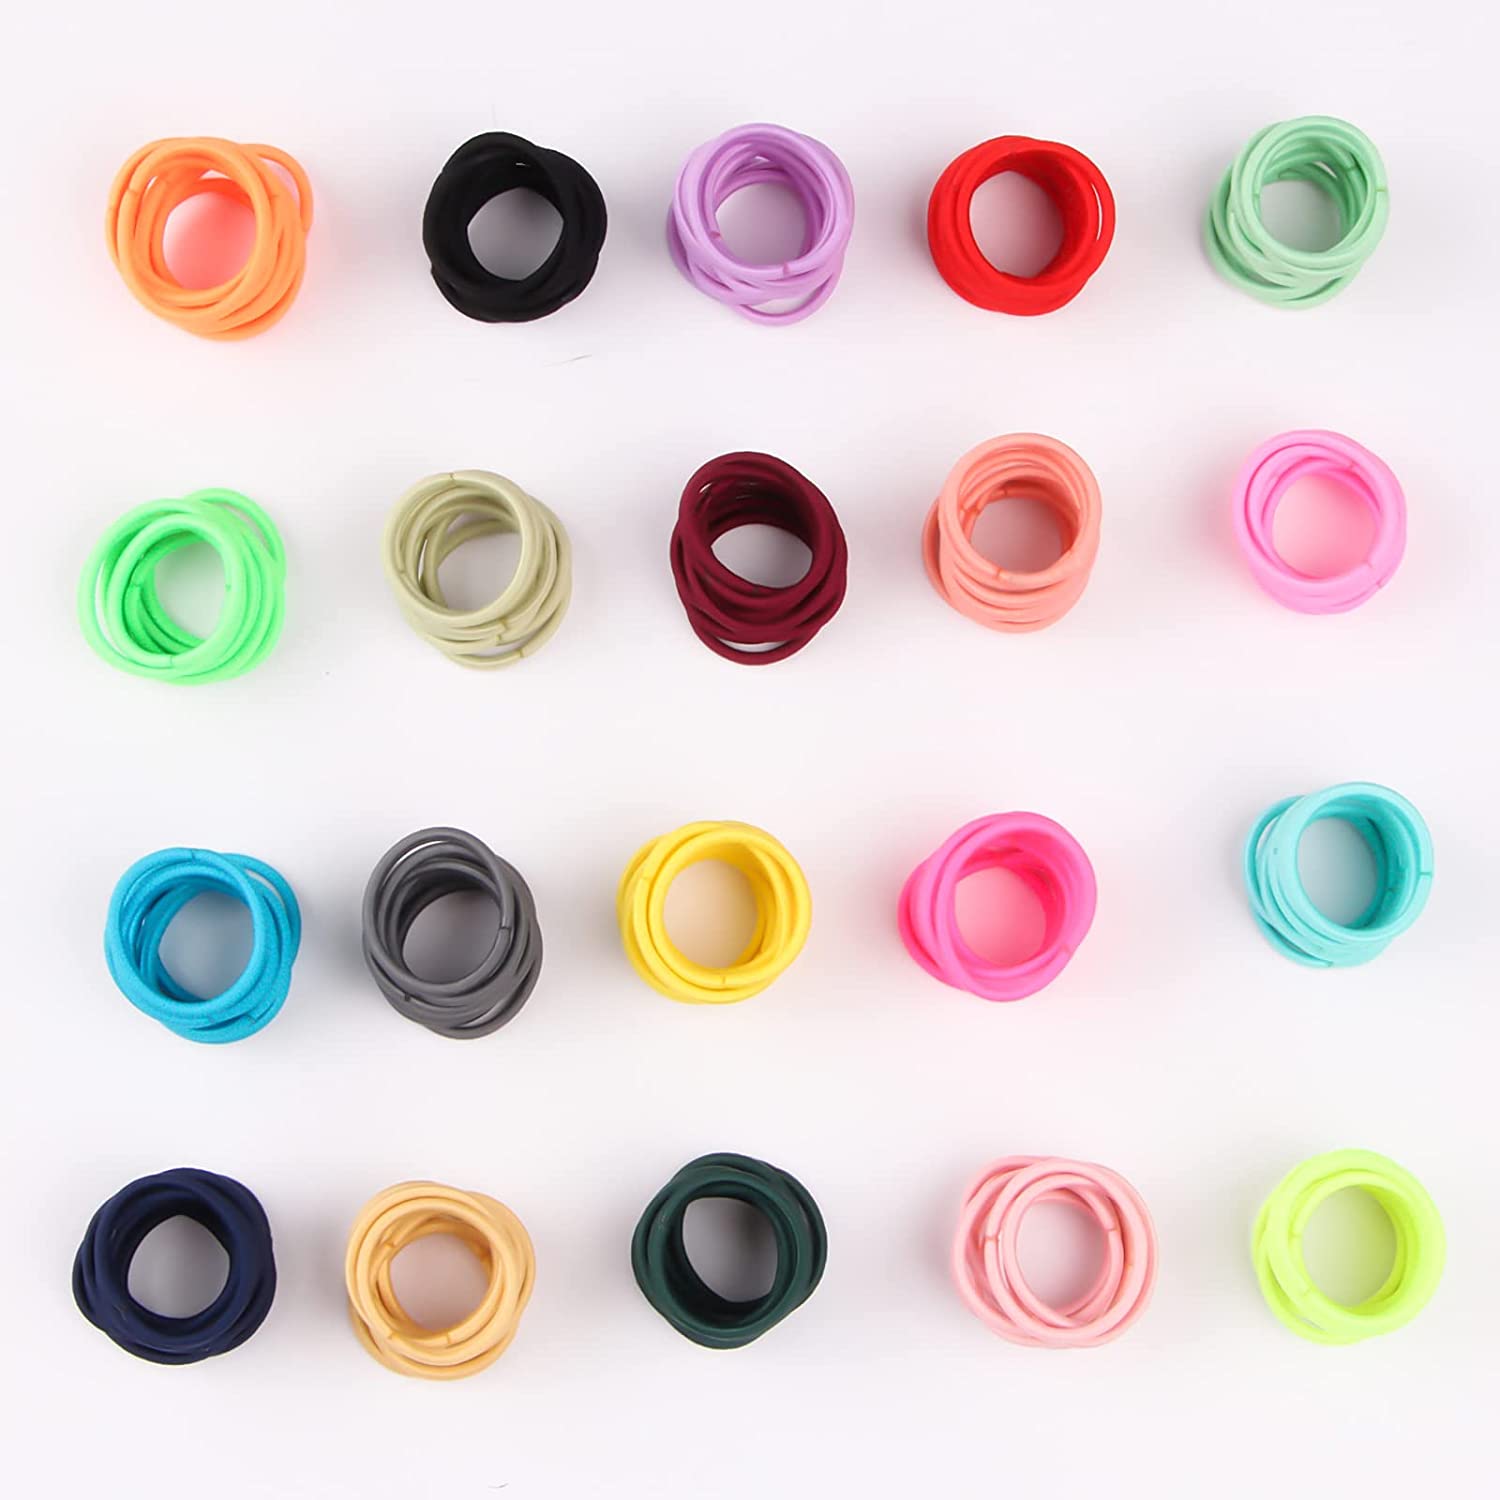 NOGIS 200PCS Baby Hair Ties for Girls, Toddler Hair Tie 2mm Thick , Small Hair Ties Multicolor Elastic Hair Bands, No Hair Damage Cute Hair Accessories Ponytail Holder for Kids - image 4 of 6